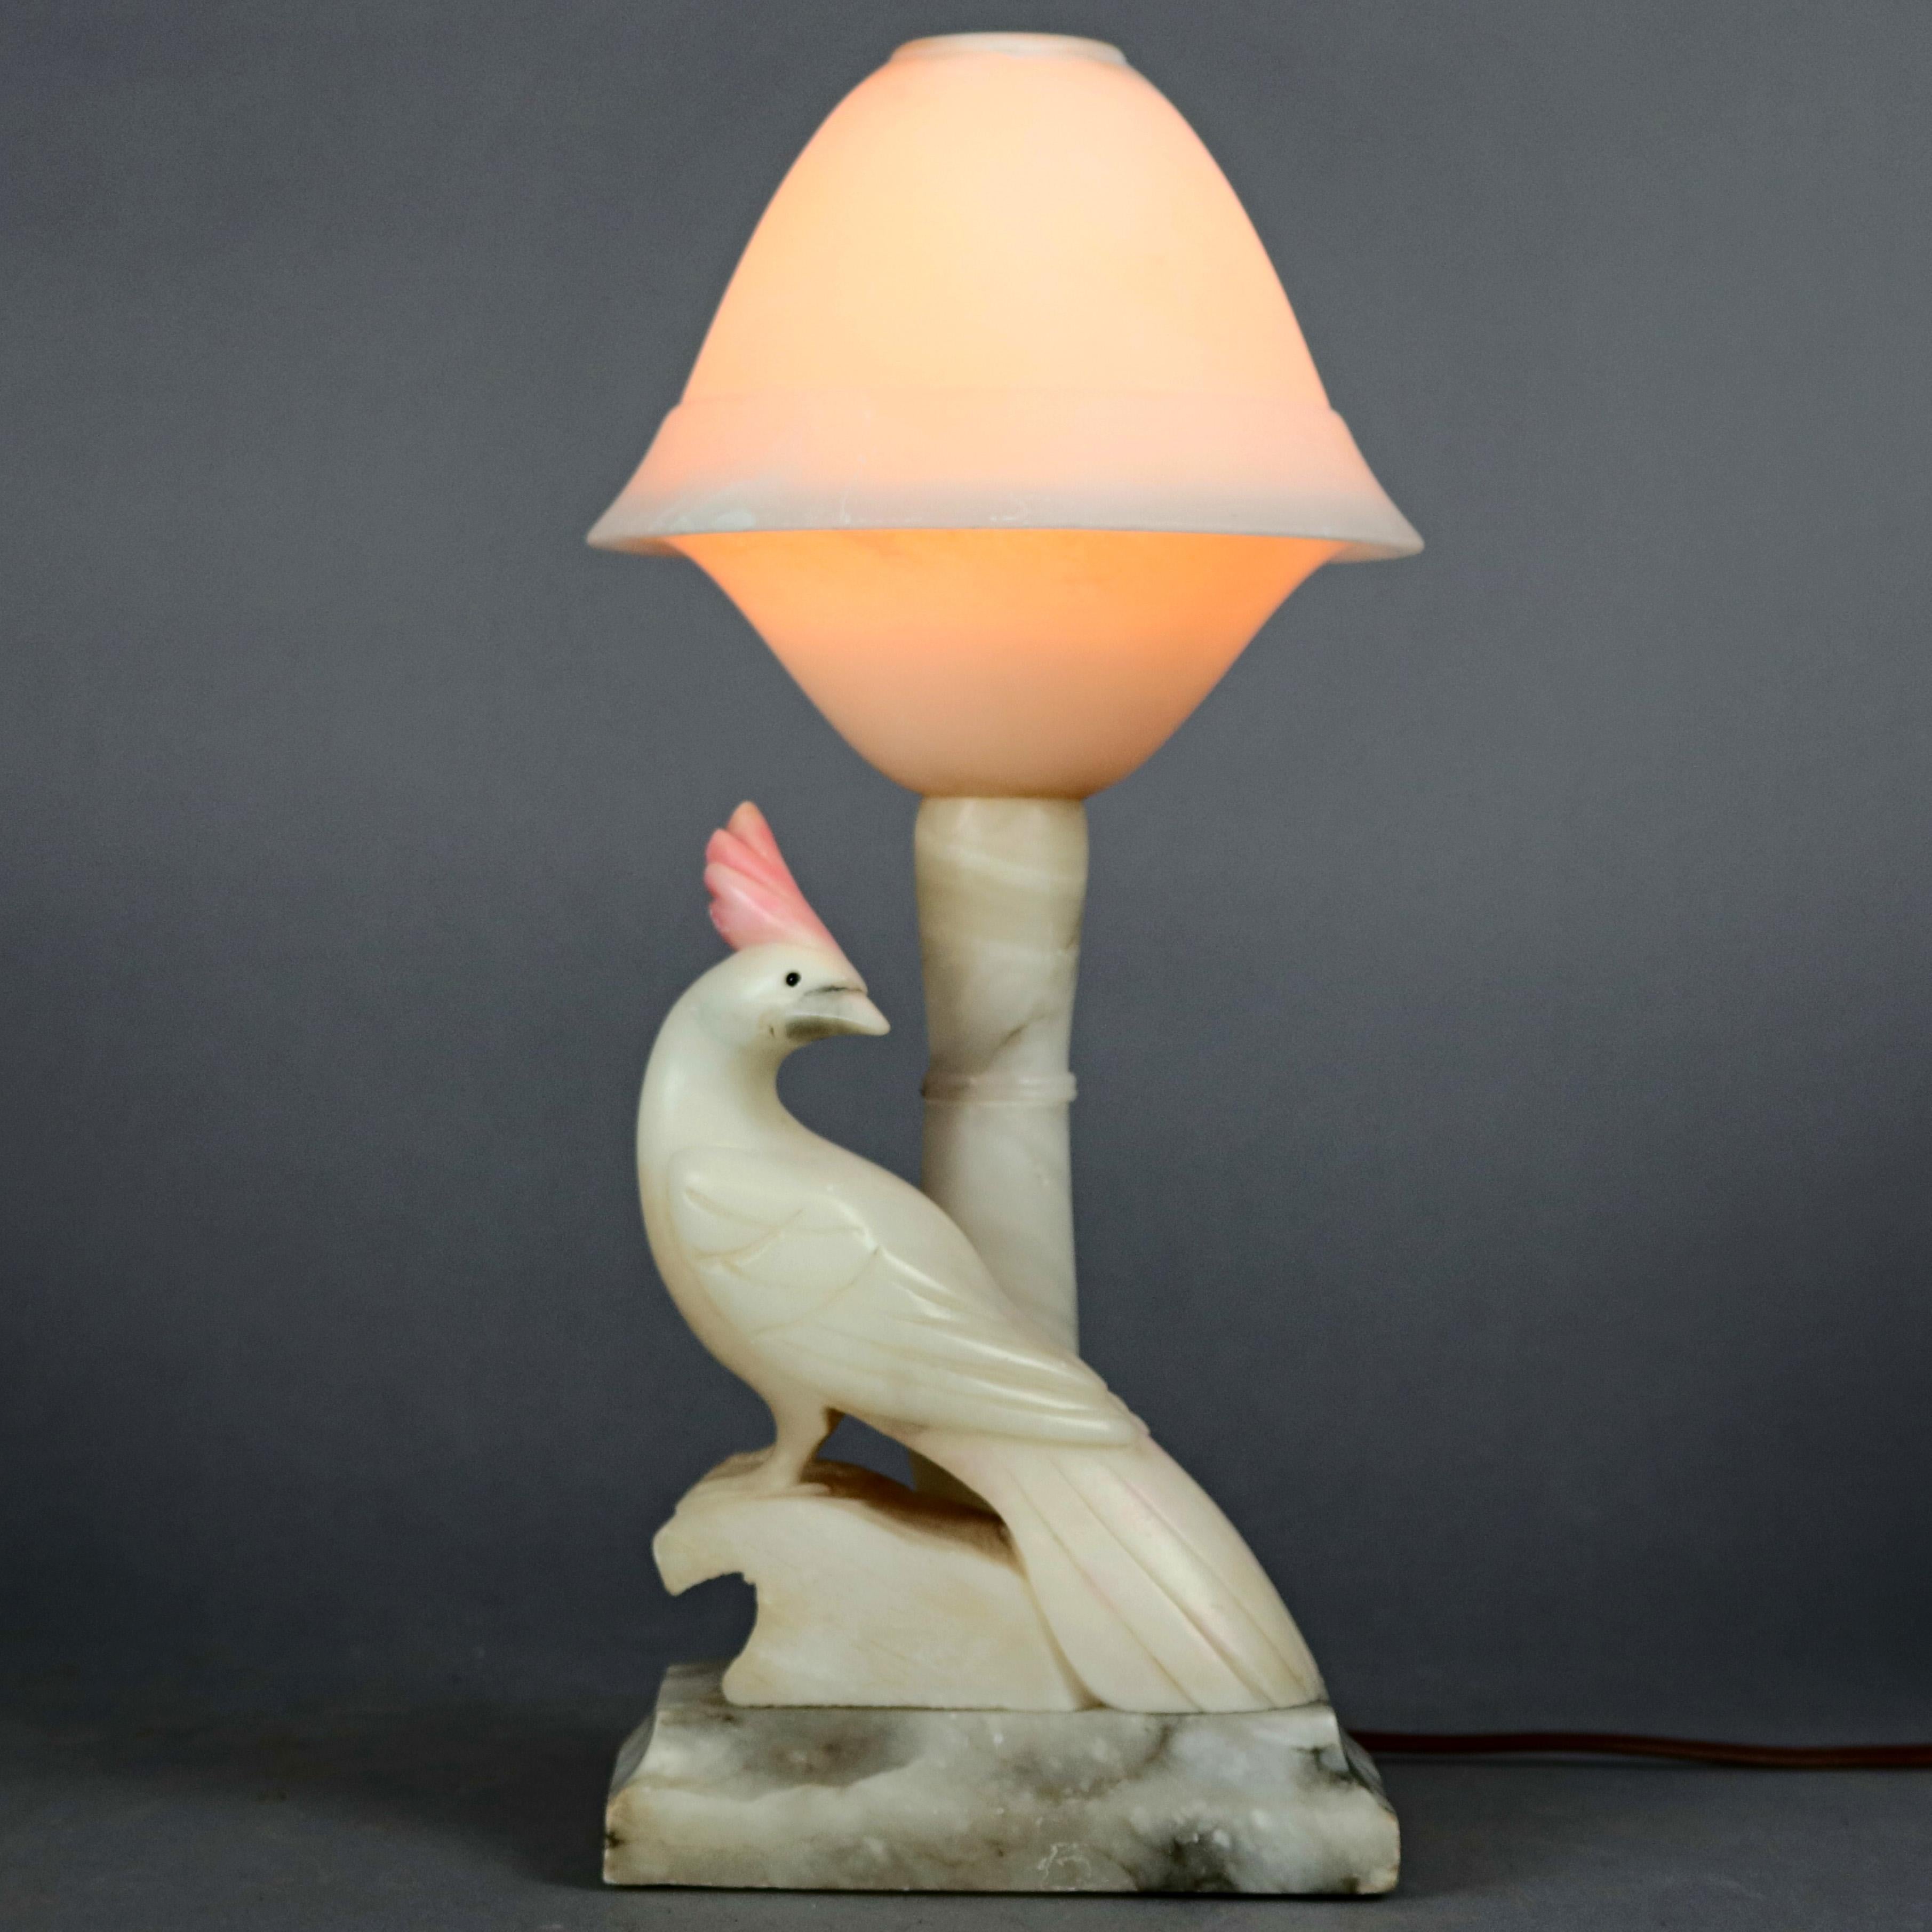 A pair of Art Deco Italian marble and alabaster figural aviary lamps offer two toned carved cockatoo sculptures seated on stepped bases with pole lamps having dome shades, Art Nouveau elements, circa 1930

***DELIVERY NOTICE – Due to COVID-19 we are